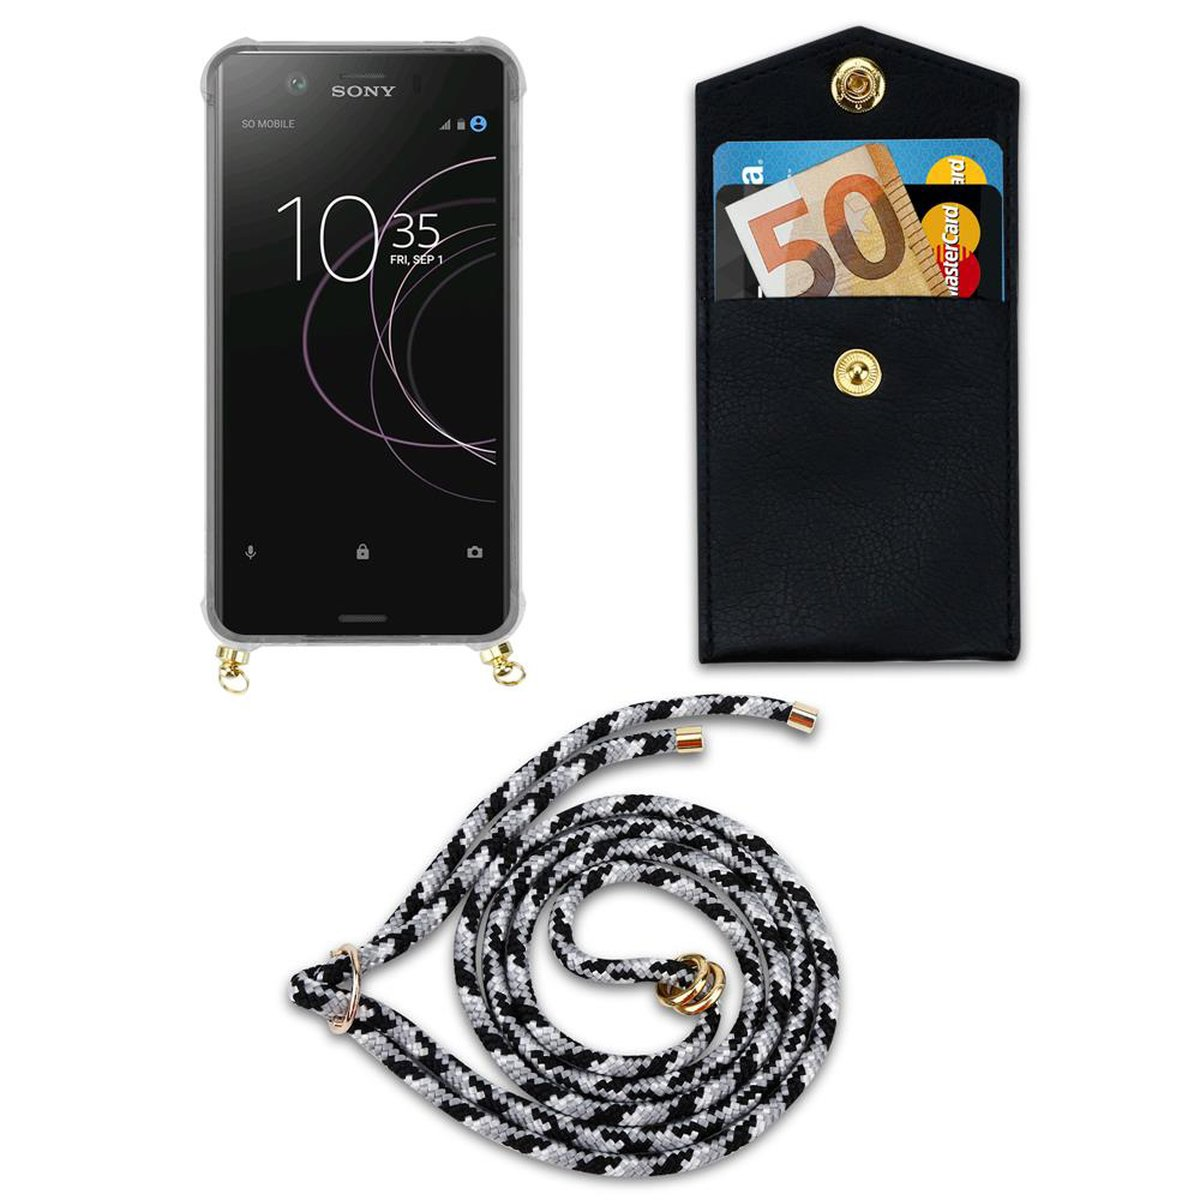 mit CAMOUFLAGE abnehmbarer Kordel SCHWARZ XZ1, Band Sony, und CADORABO Xperia Gold Hülle, Ringen, Backcover, Handy Kette